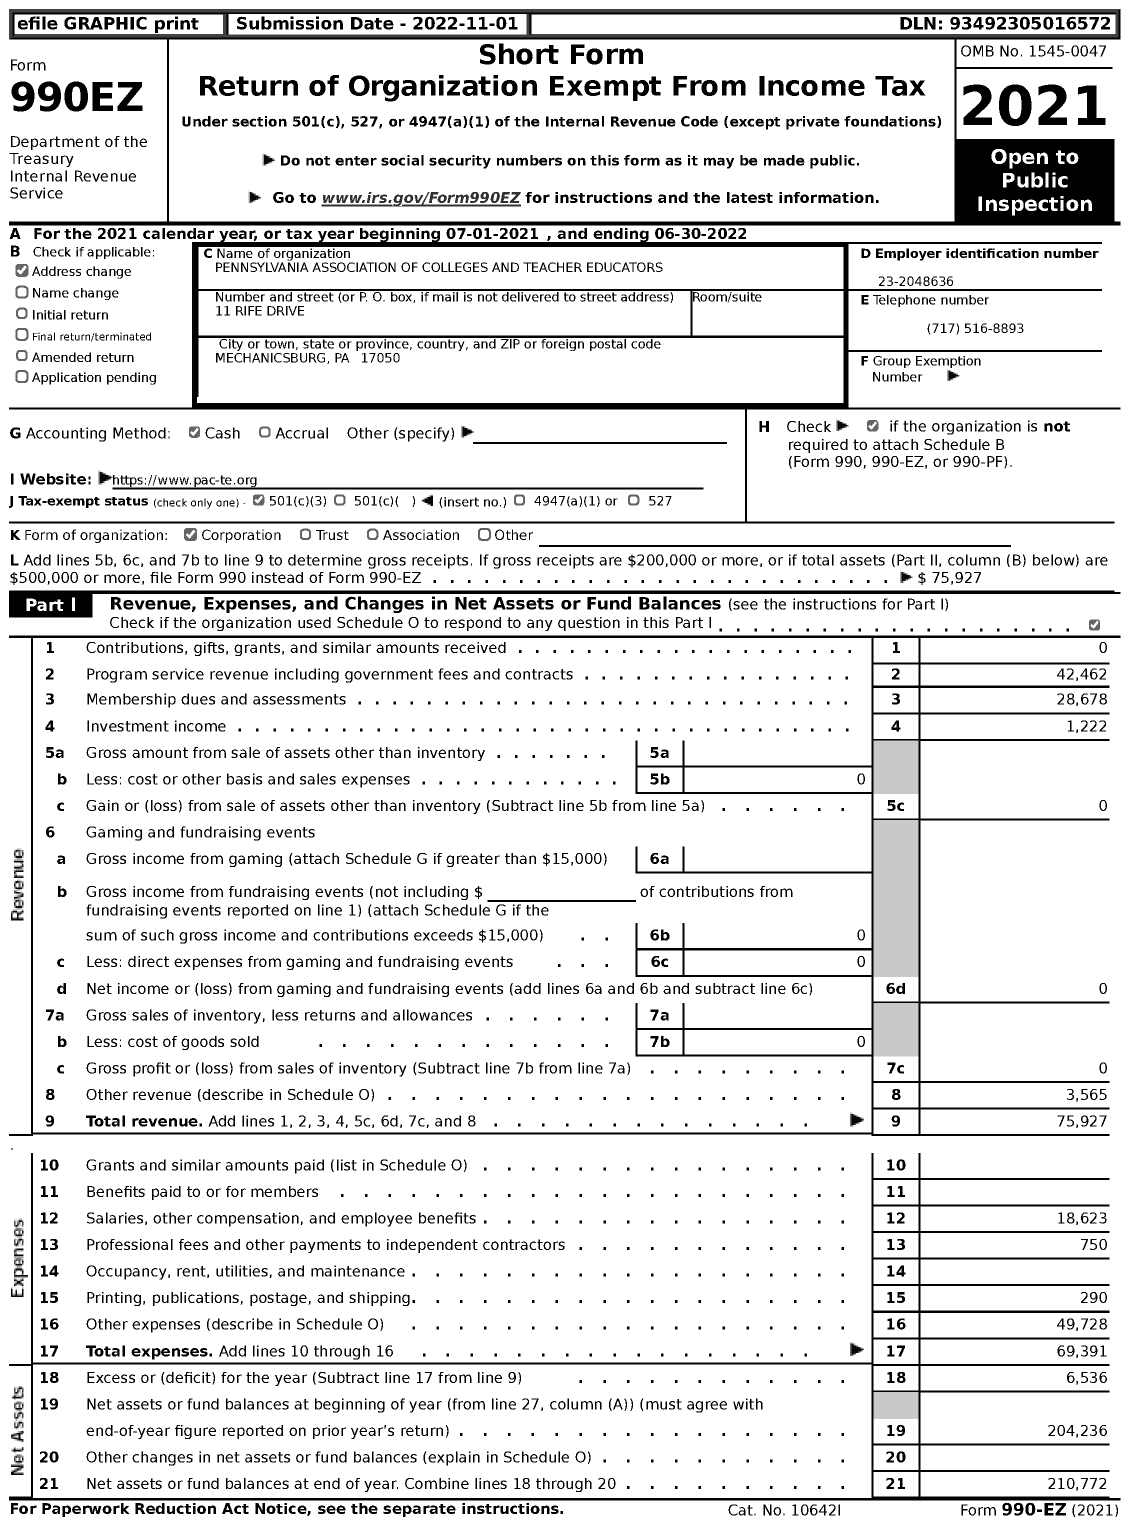 Image of first page of 2021 Form 990EZ for Pennsylvania Association of Colleges and Teacher Educators